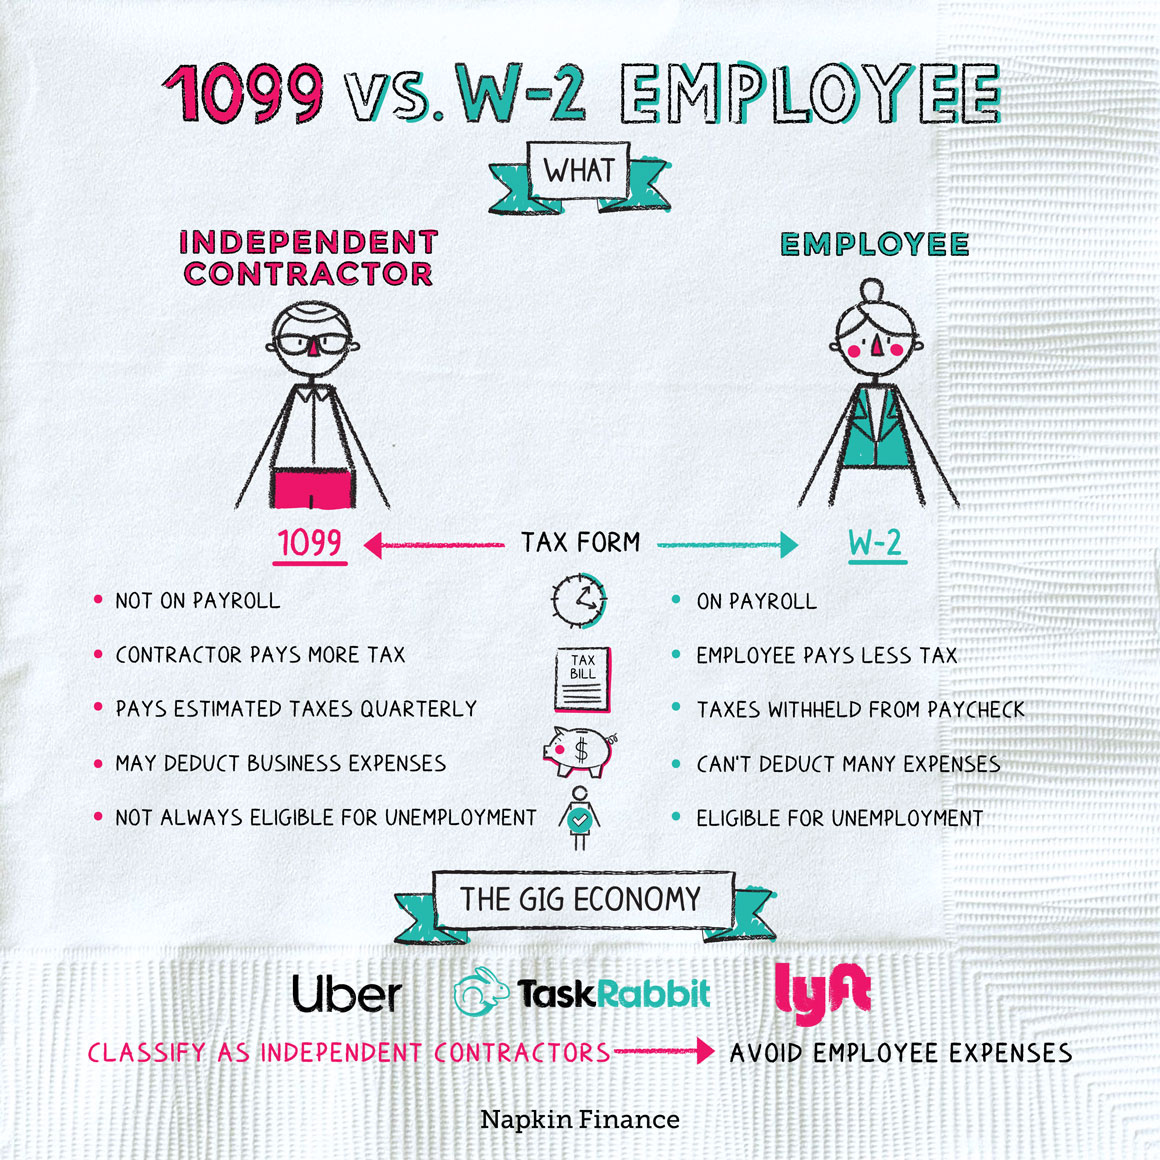 What Is A 1099 Vs W-2 Employee? – Napkin Finance throughout W2 Form For Independent Contractors